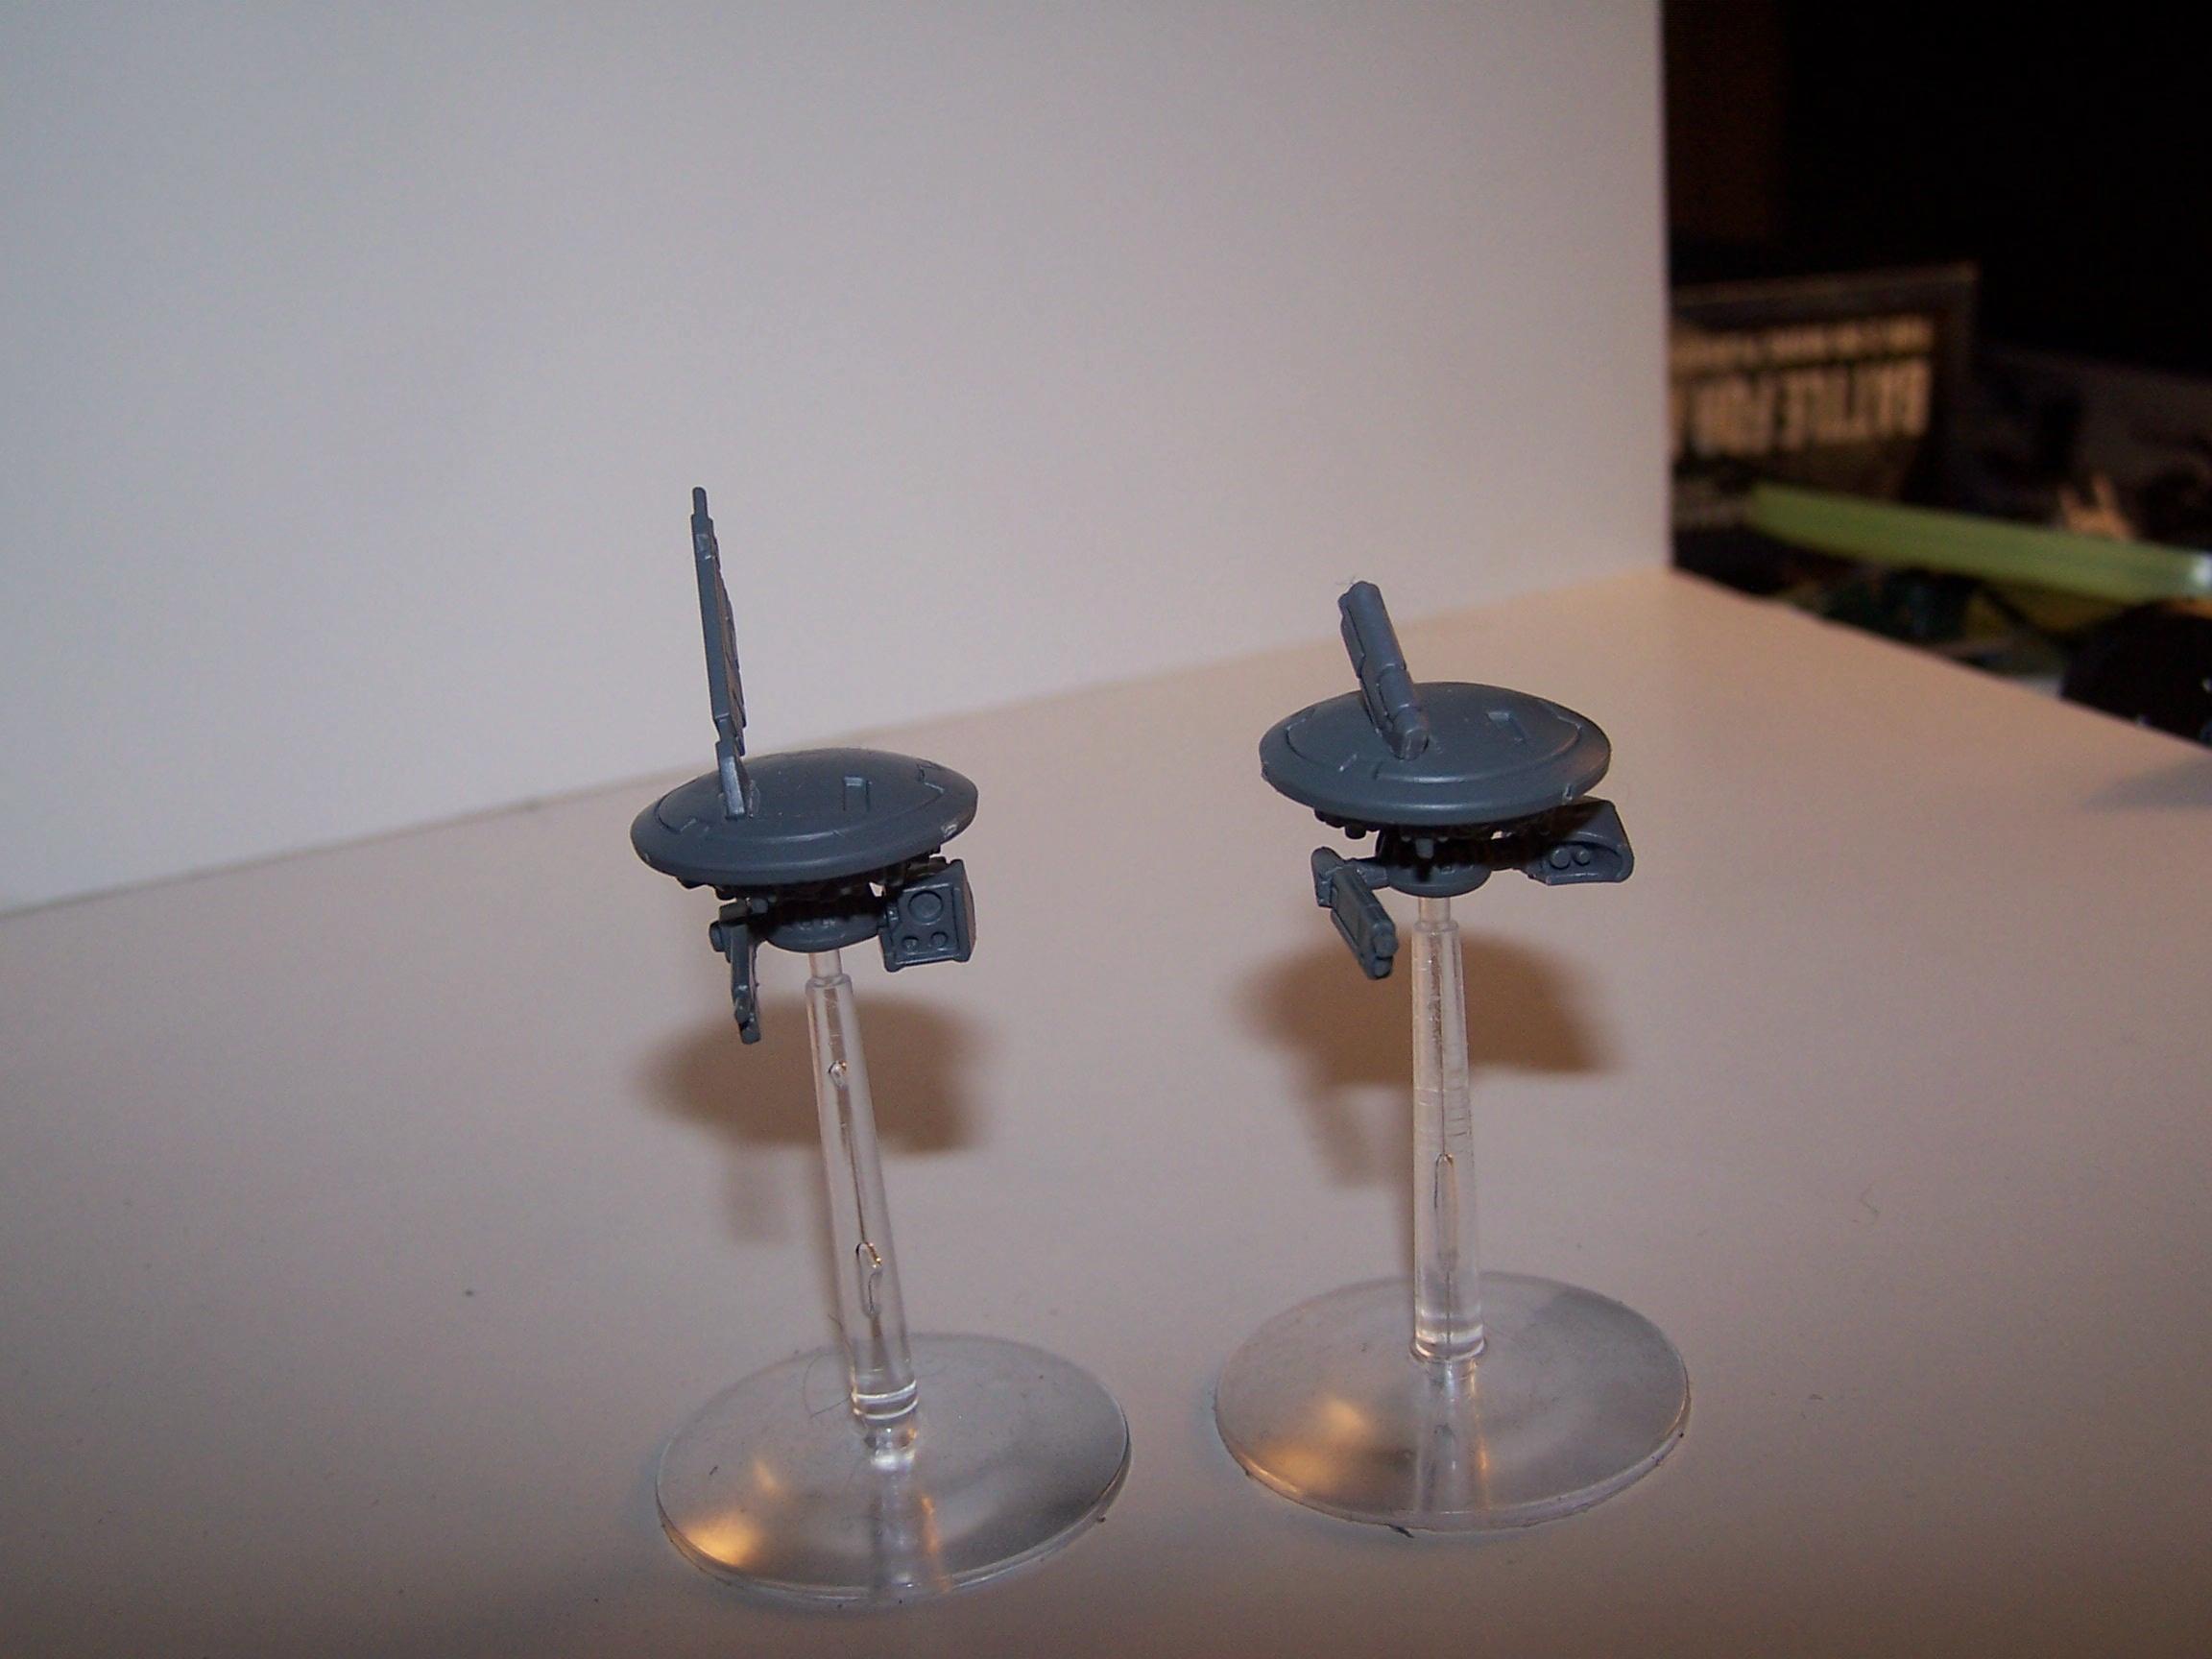 Comparison with the "Offical" Marker Drone model